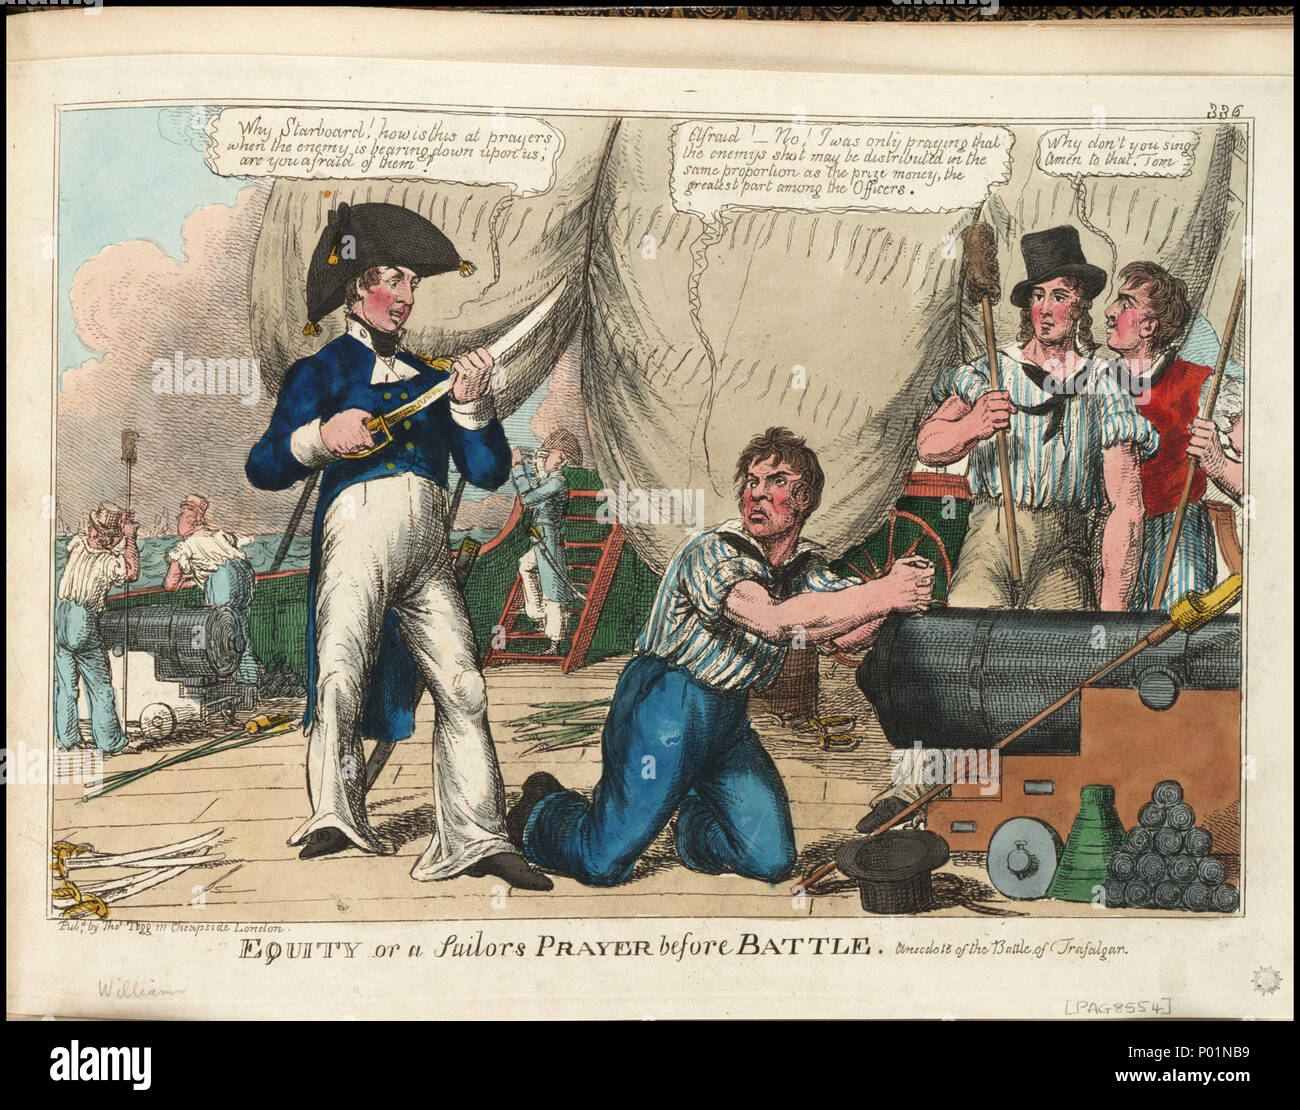 .  English: 'Equity or a Sailor's Prayer before Battle. Anecdote of the Battle of Trafalgar' (caricature) Hand-coloured.; No.42. Bound in album PAG8512 with prints PAG8513-PAG8647; PAG8649- PAG8666. A post-Trafalgar satire showing a scene of the deck of a British vessel. It offers an unusually adversarial stance taken from the perspective of the lower-deck sailor. With cannon being prepared, the tar is shown on his knees at prayer. At this, one of the officers remarks ‘Why Starboard! how is this at prayers when the enemy is bearing down upon us; are you afraid of them?’ ‘Starboard’ replies ‘Af Stock Photo